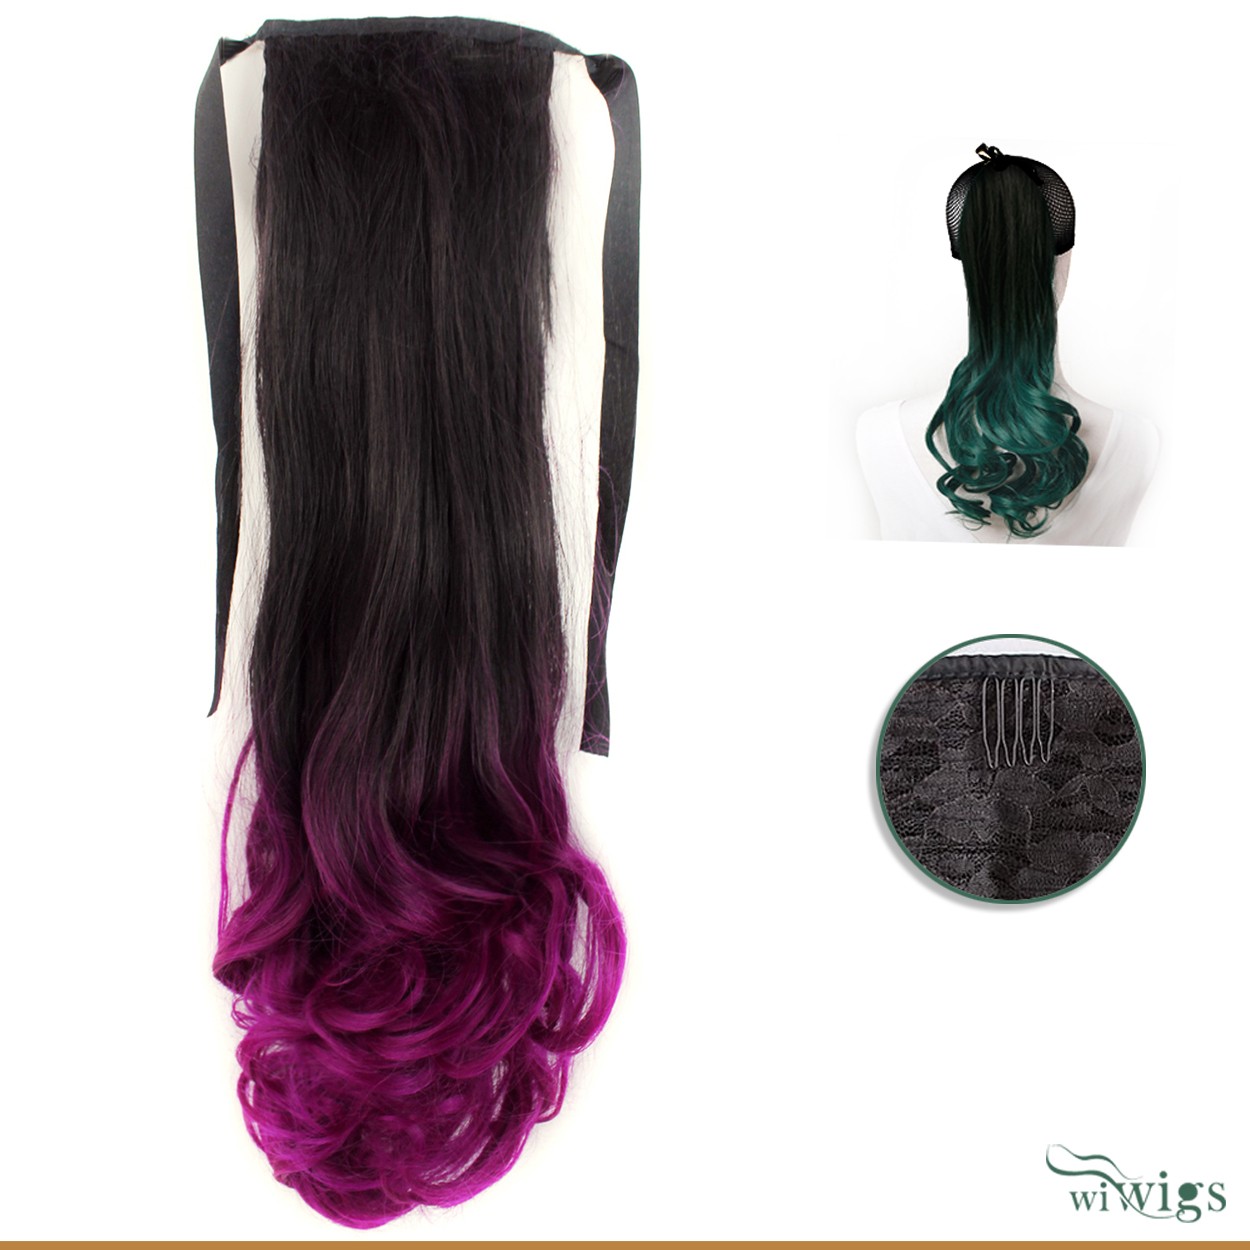 Wiwigs - Black Brown & Purple Red Dip-Dye Ombre Hairpiece Ponytail  Extension UK